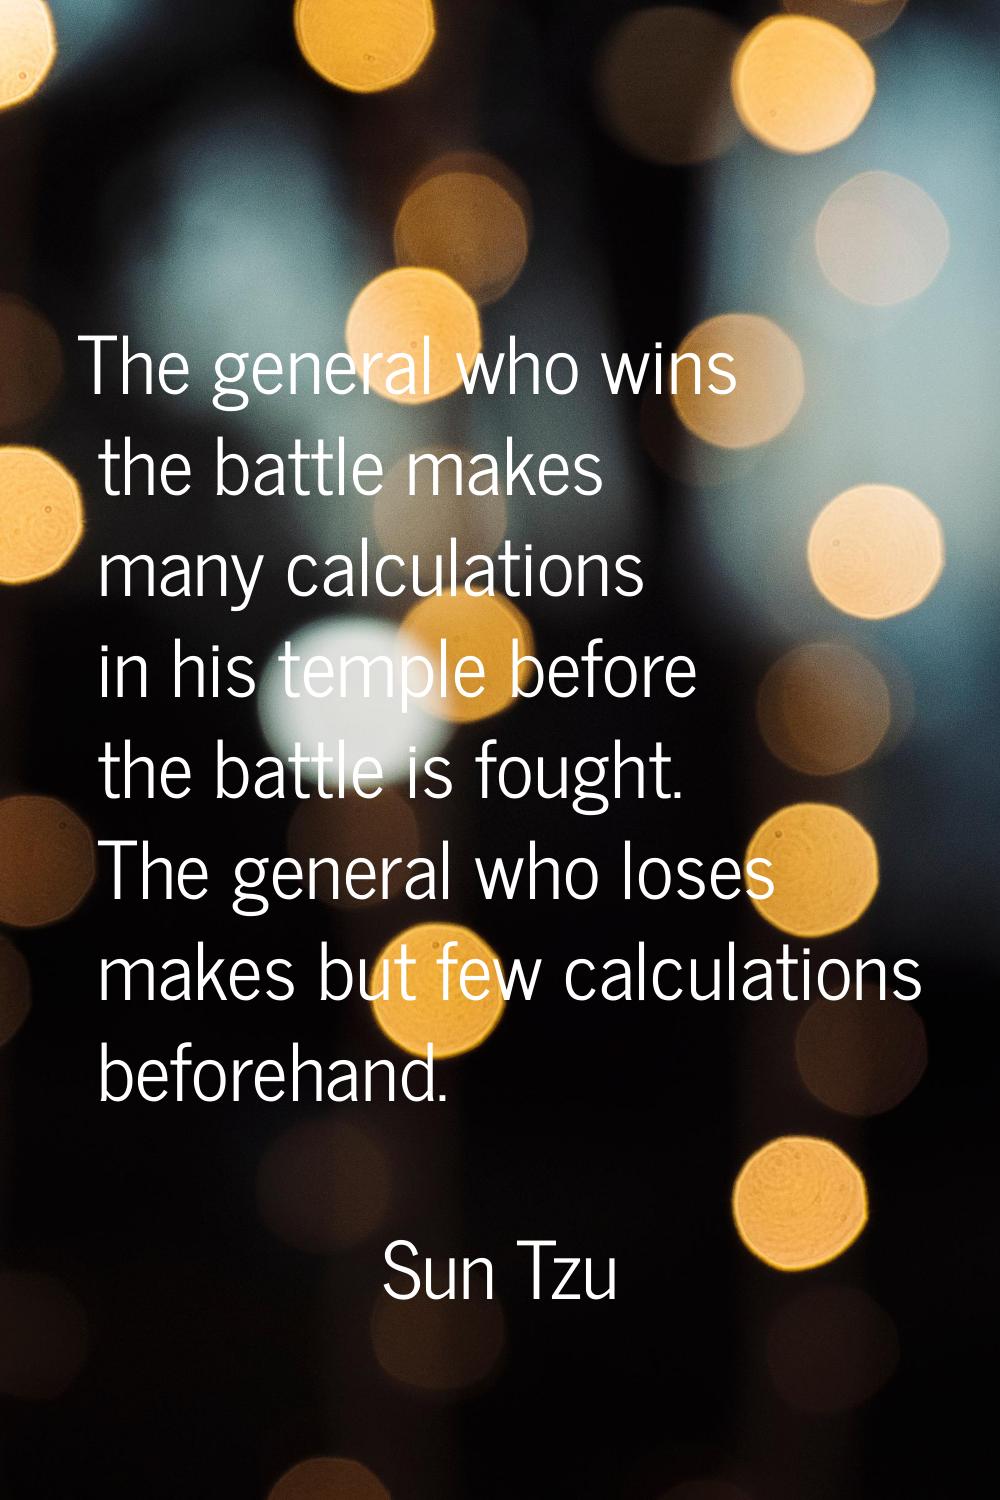 The general who wins the battle makes many calculations in his temple before the battle is fought. 